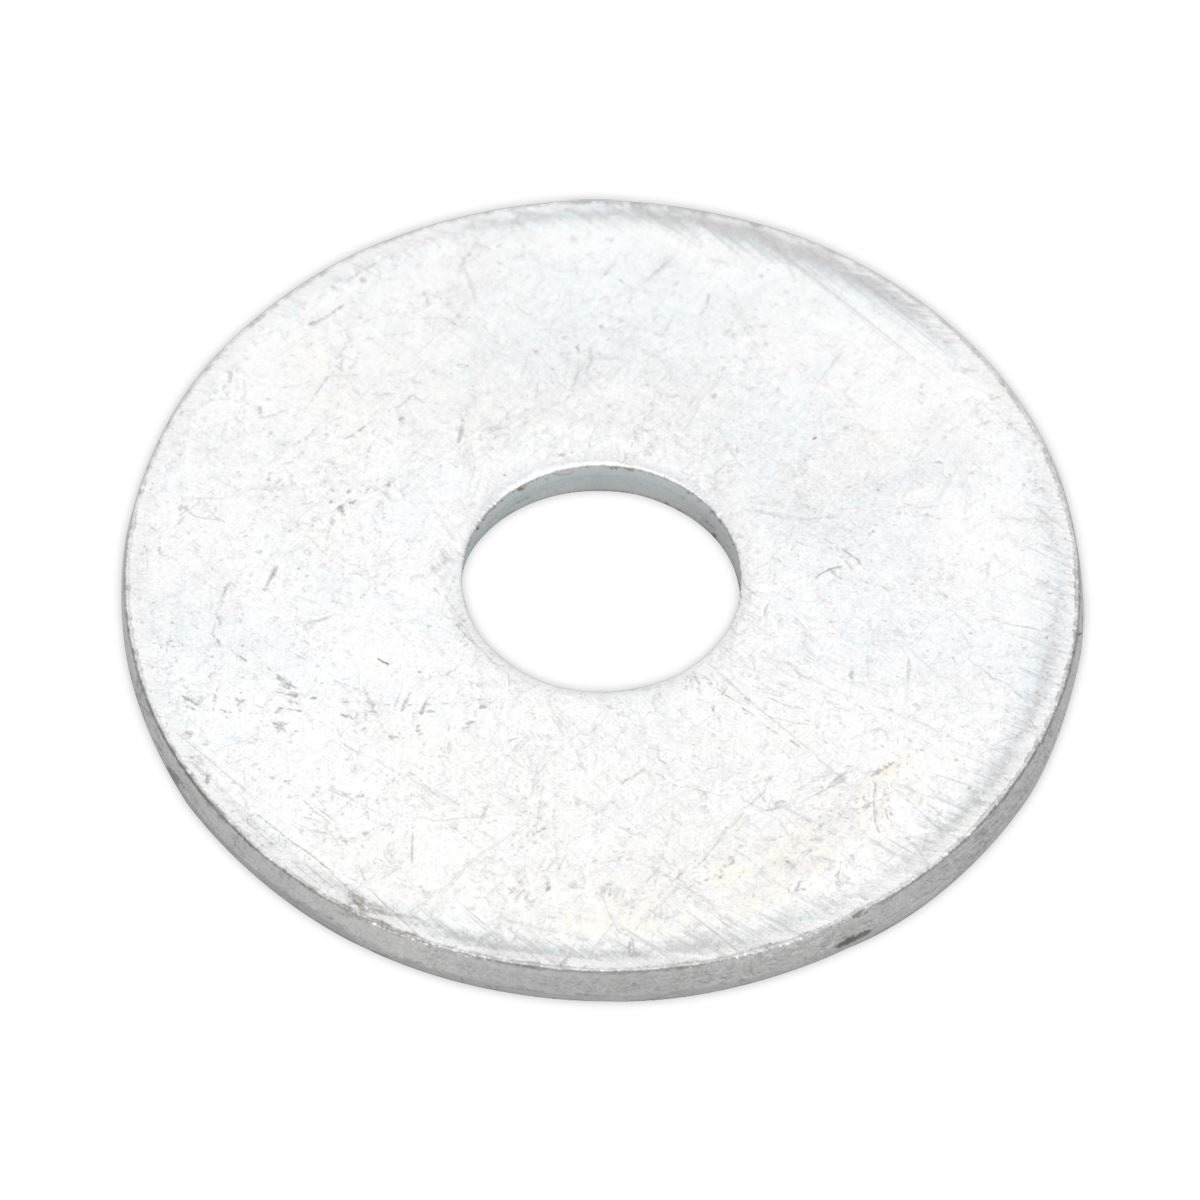 Sealey Repair Washer M10 x 30mm Zinc Plated Pack of 50